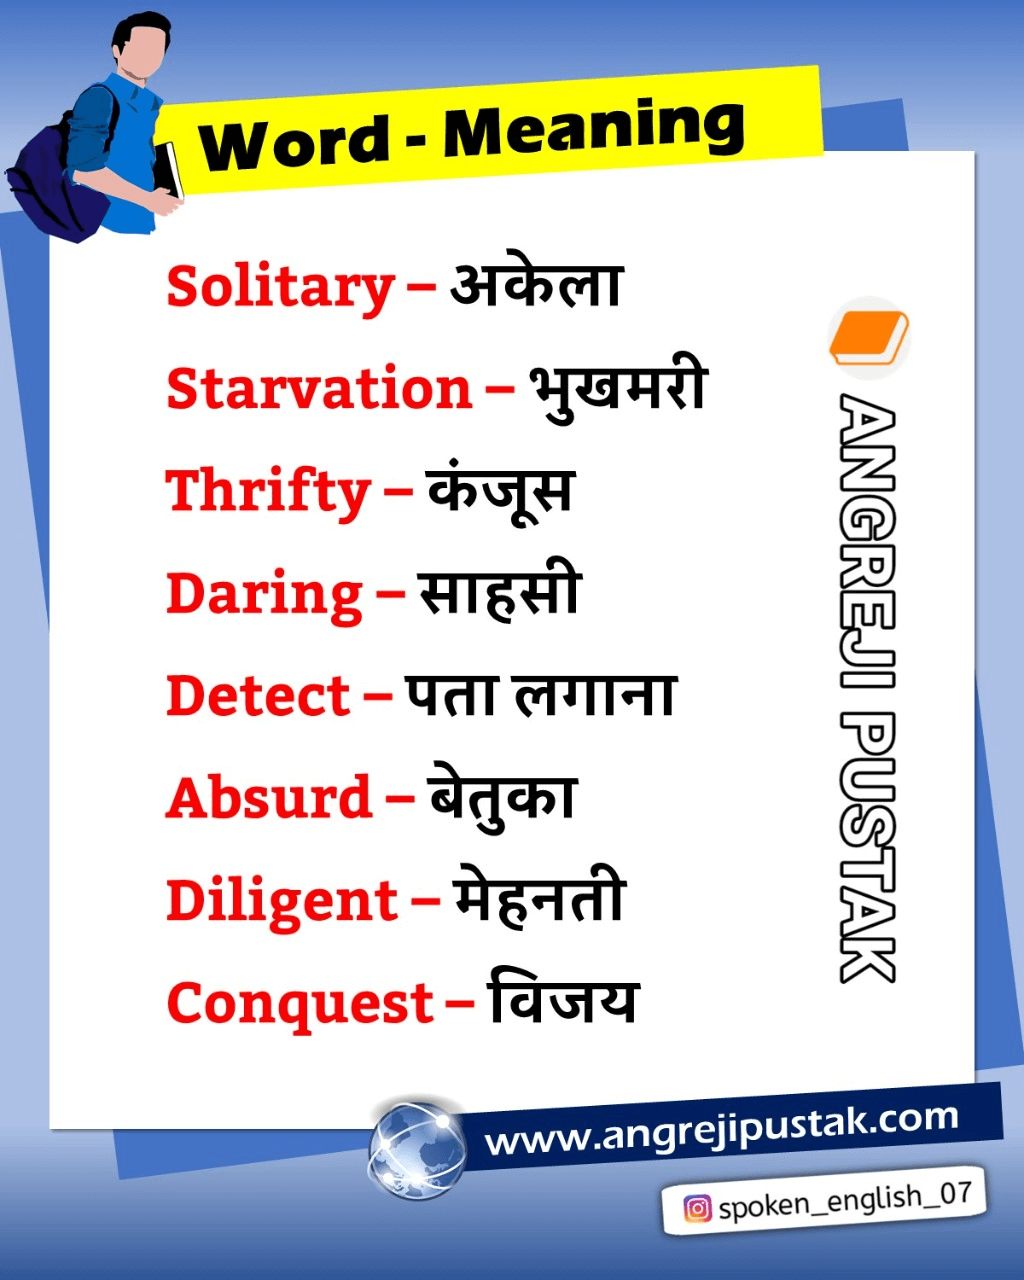 50-word-meaning-english-to-hindi-difficult-words-in-hindi-and-english